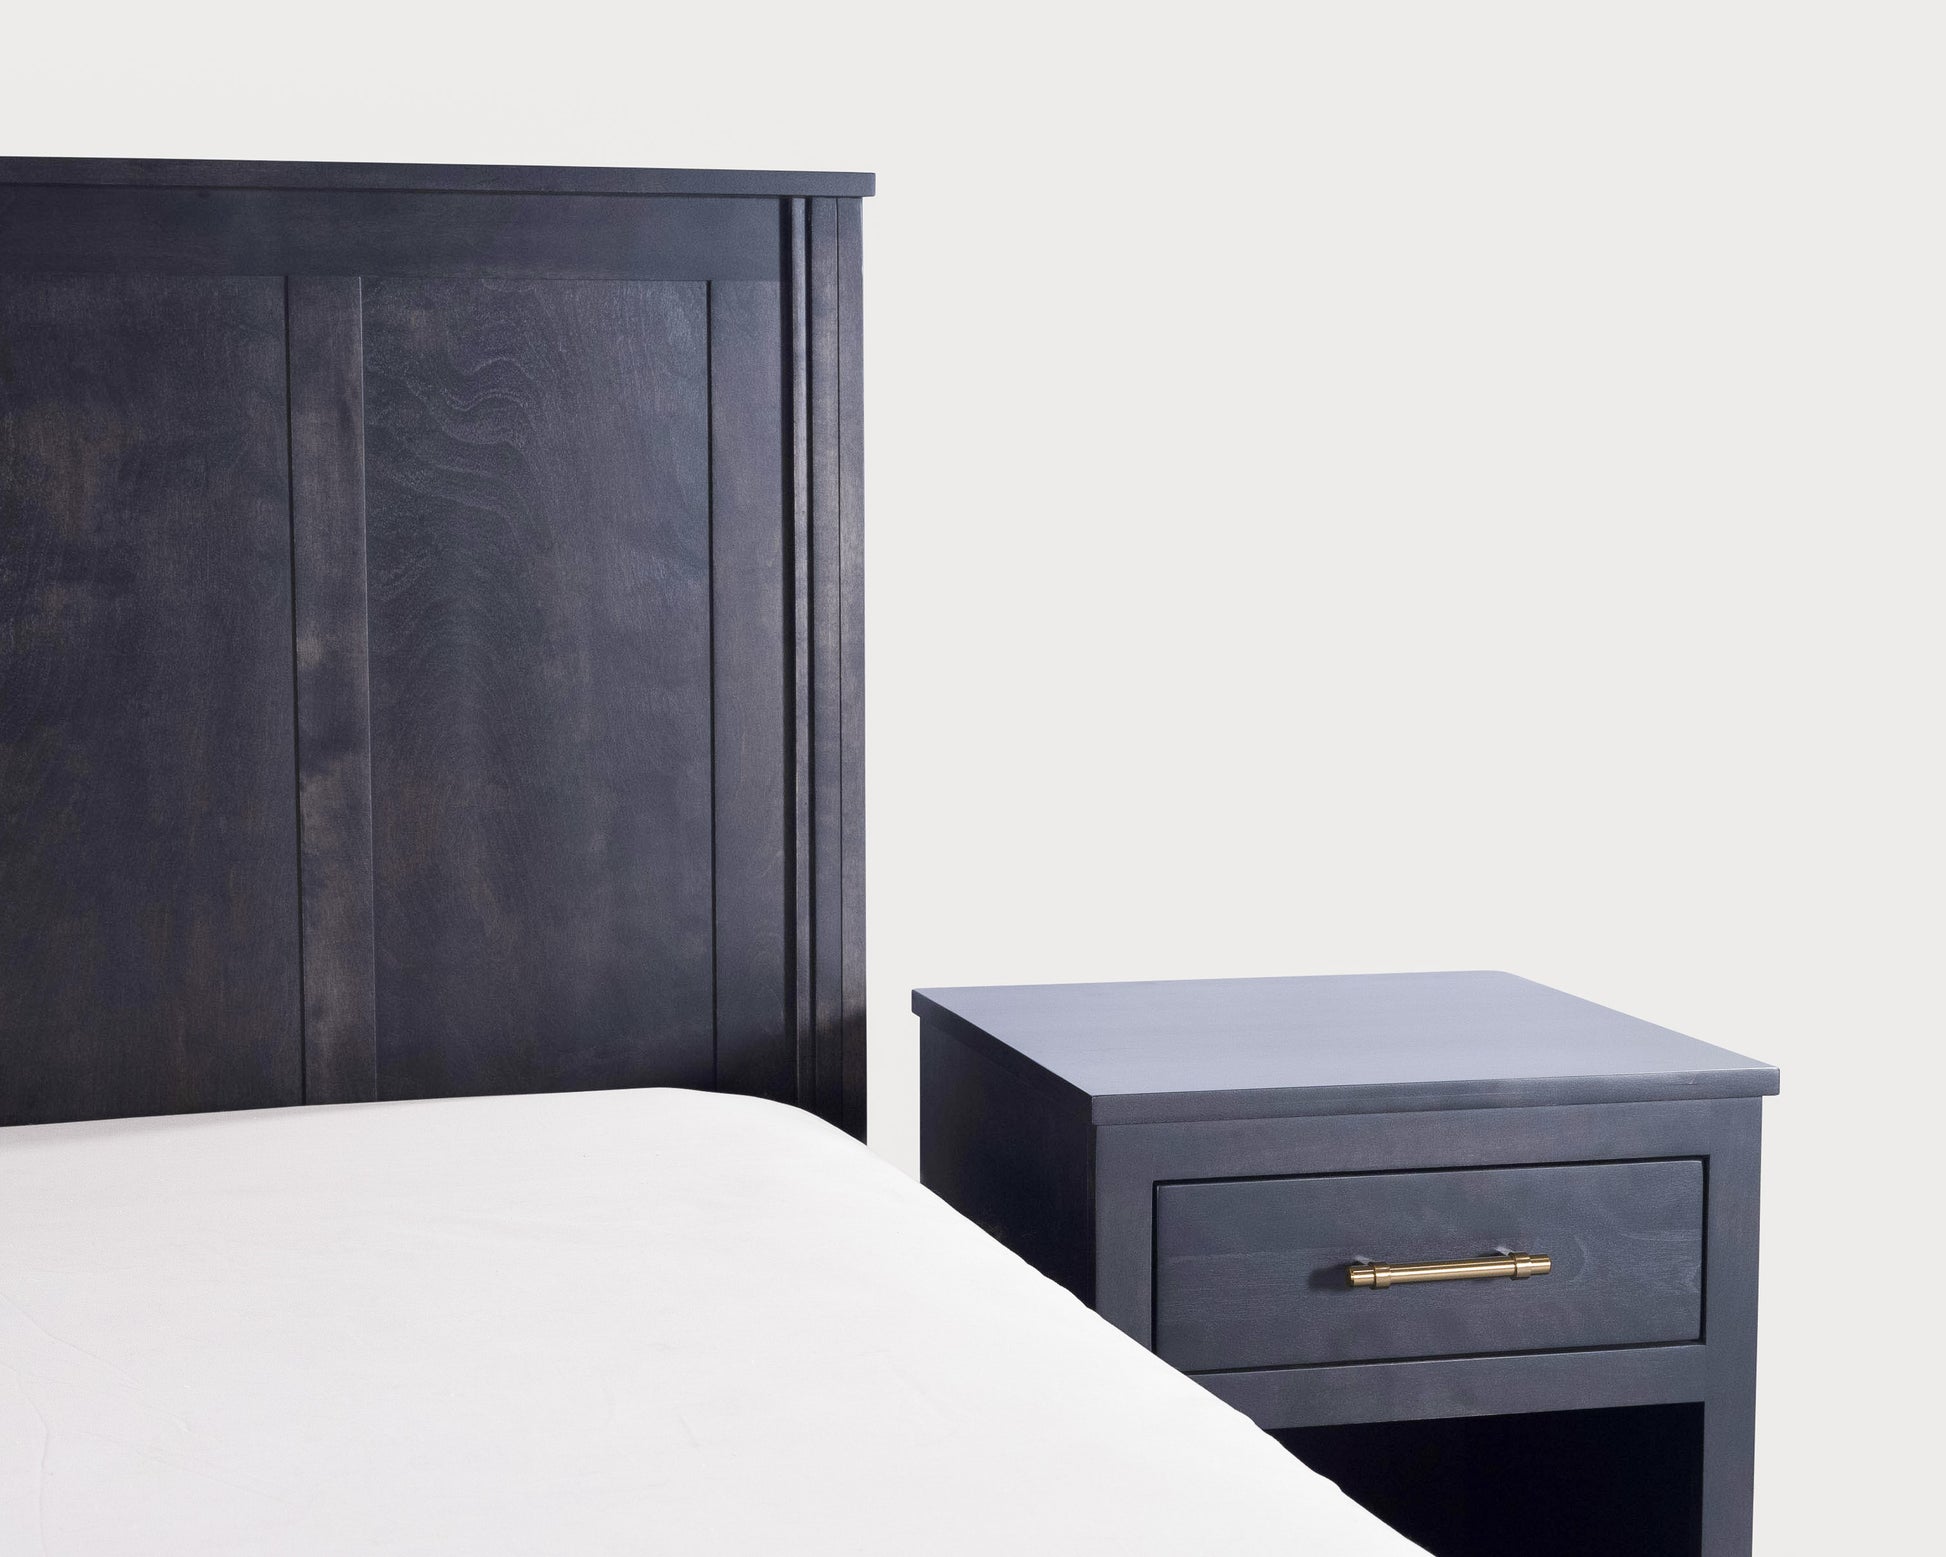 Acadia Tremont Platform Bed with Simple Footboard shown close up on headboard to highlight details.